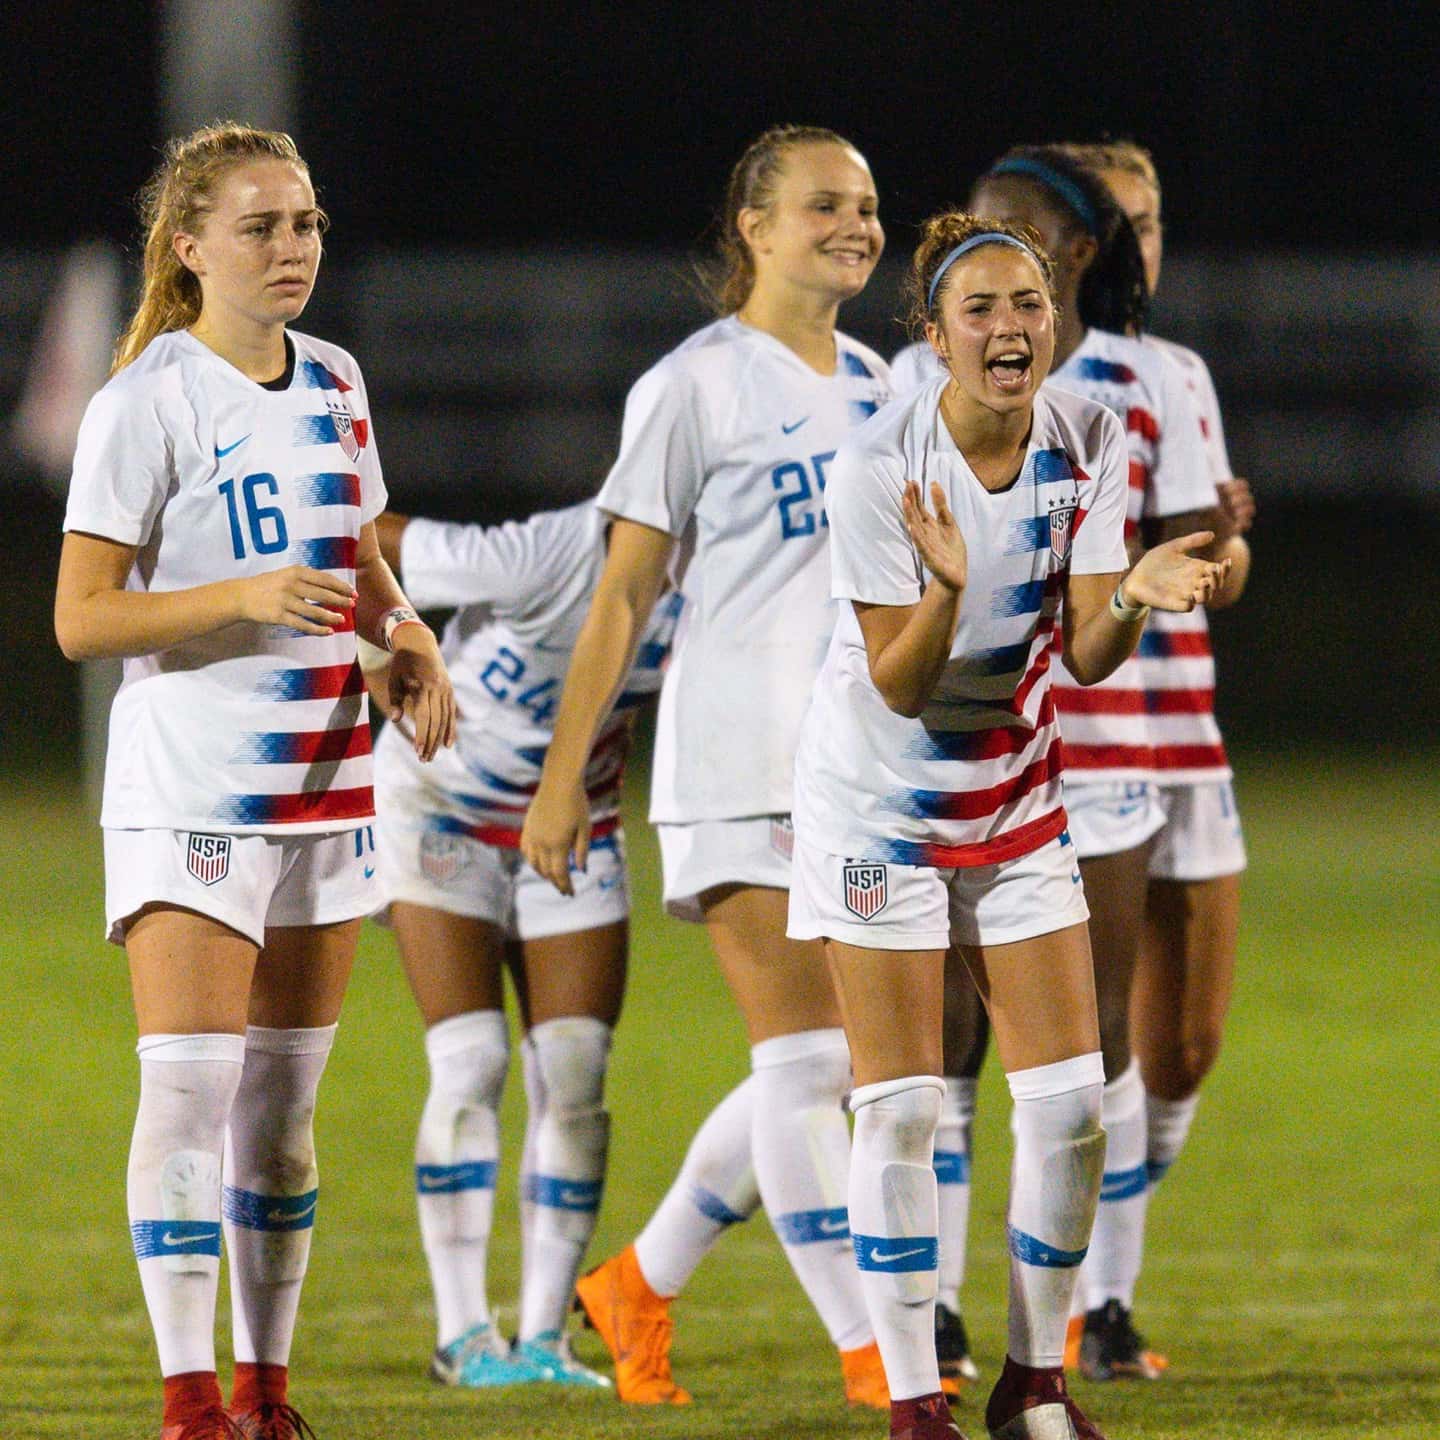 U.S. Under17 Women’s National Team will Face England Twice in Final